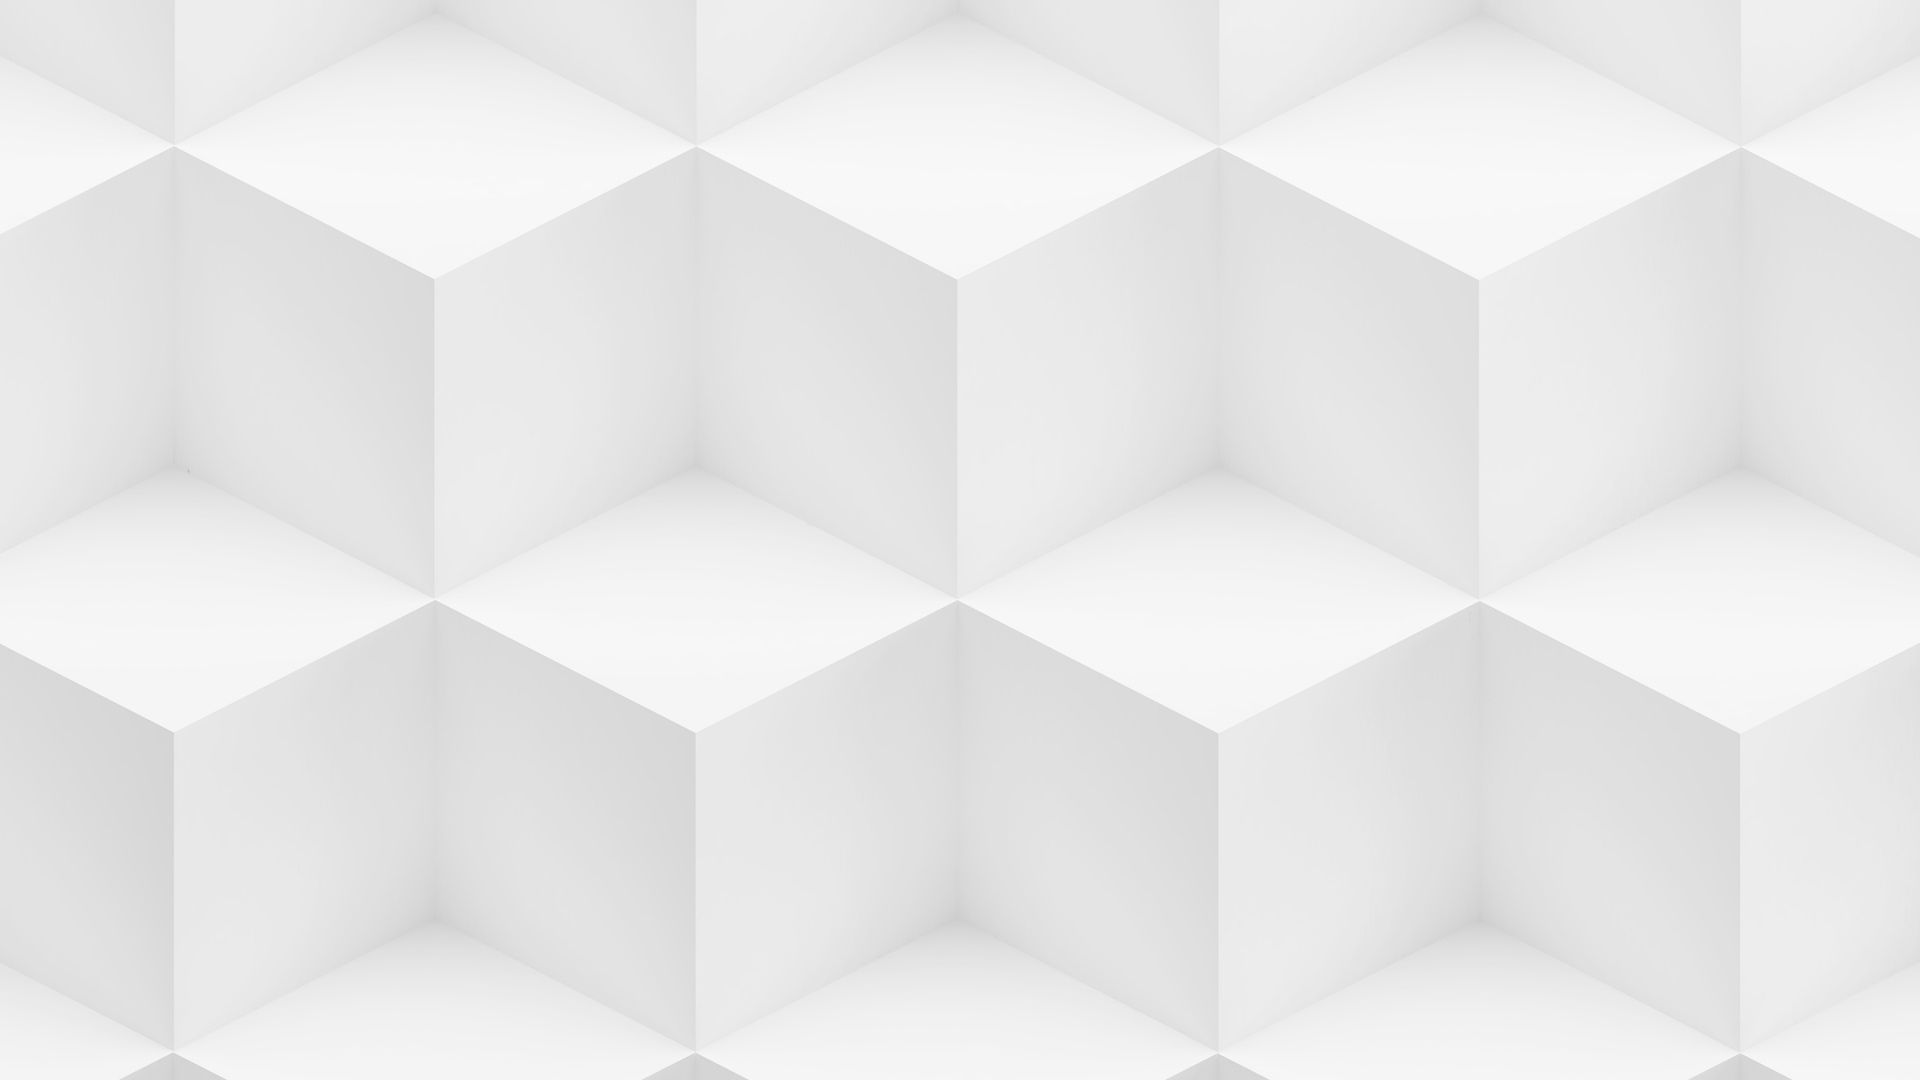 A seamless pattern of white cubes on a white background.